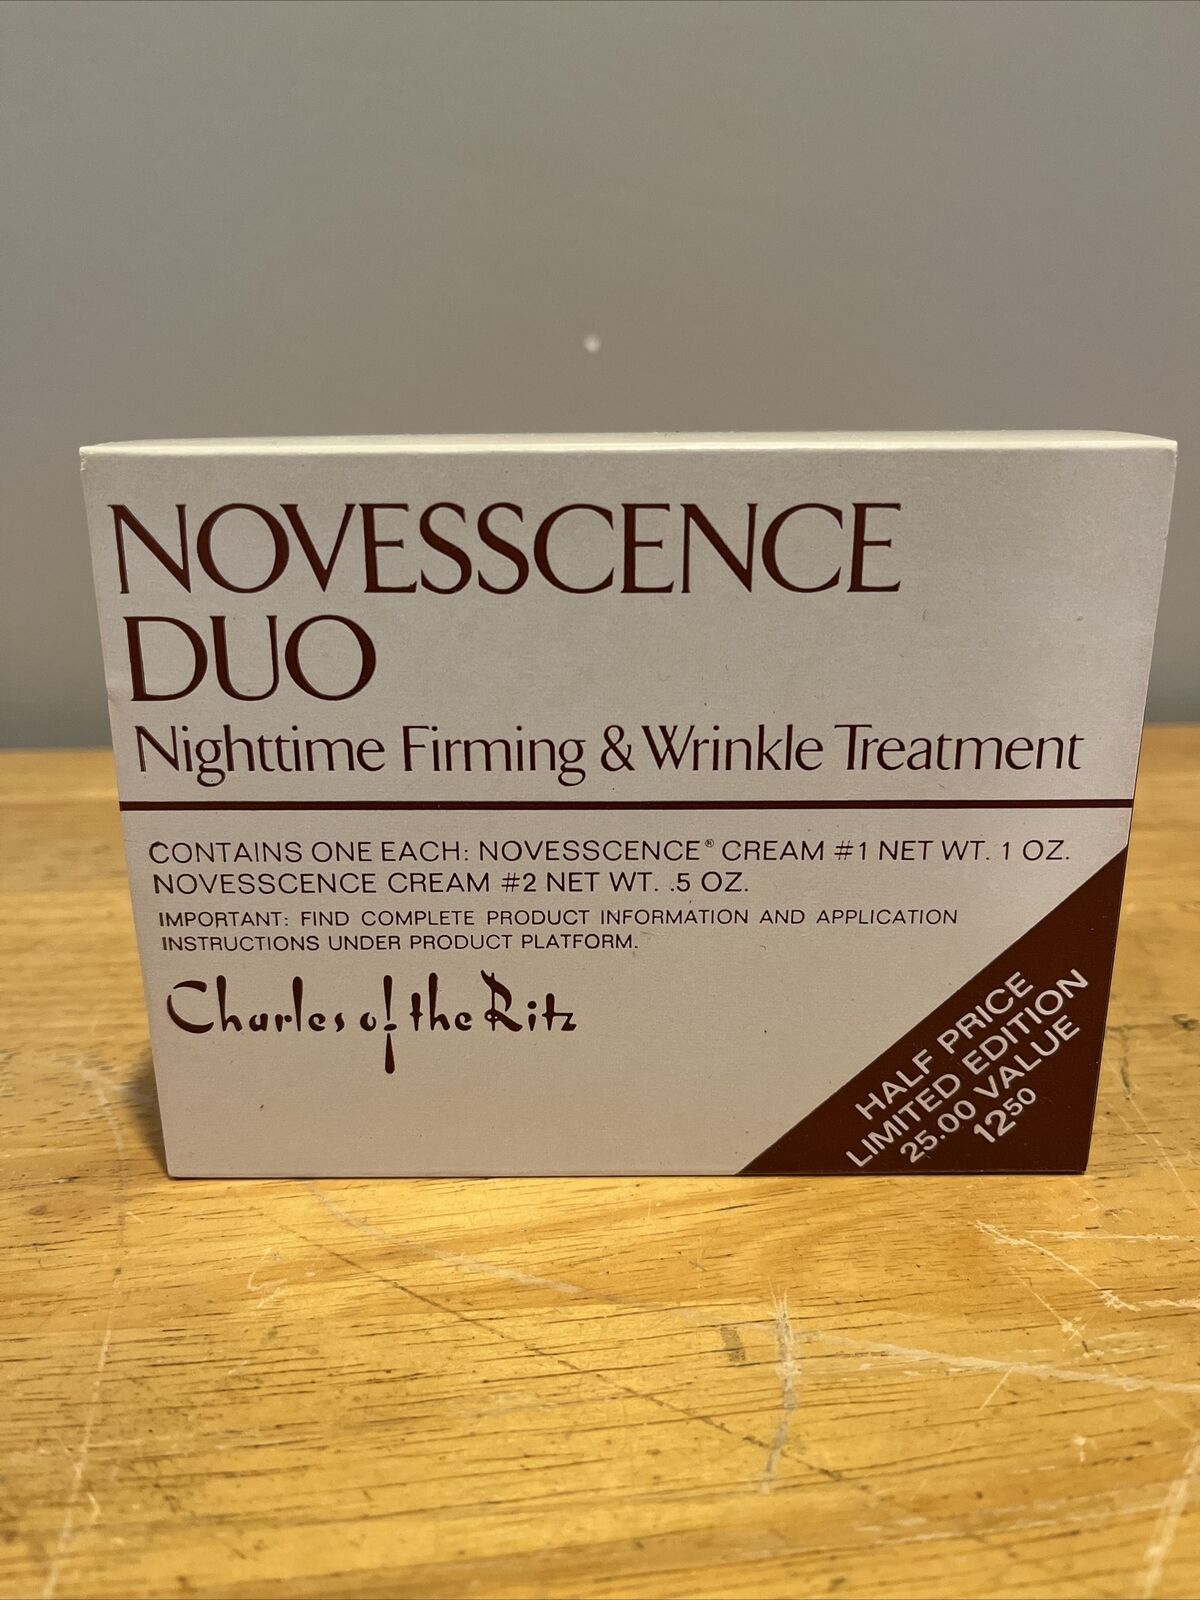 Charles of the Ritz Novesscence Duo Nighttime Firming Wrinkle Treatment